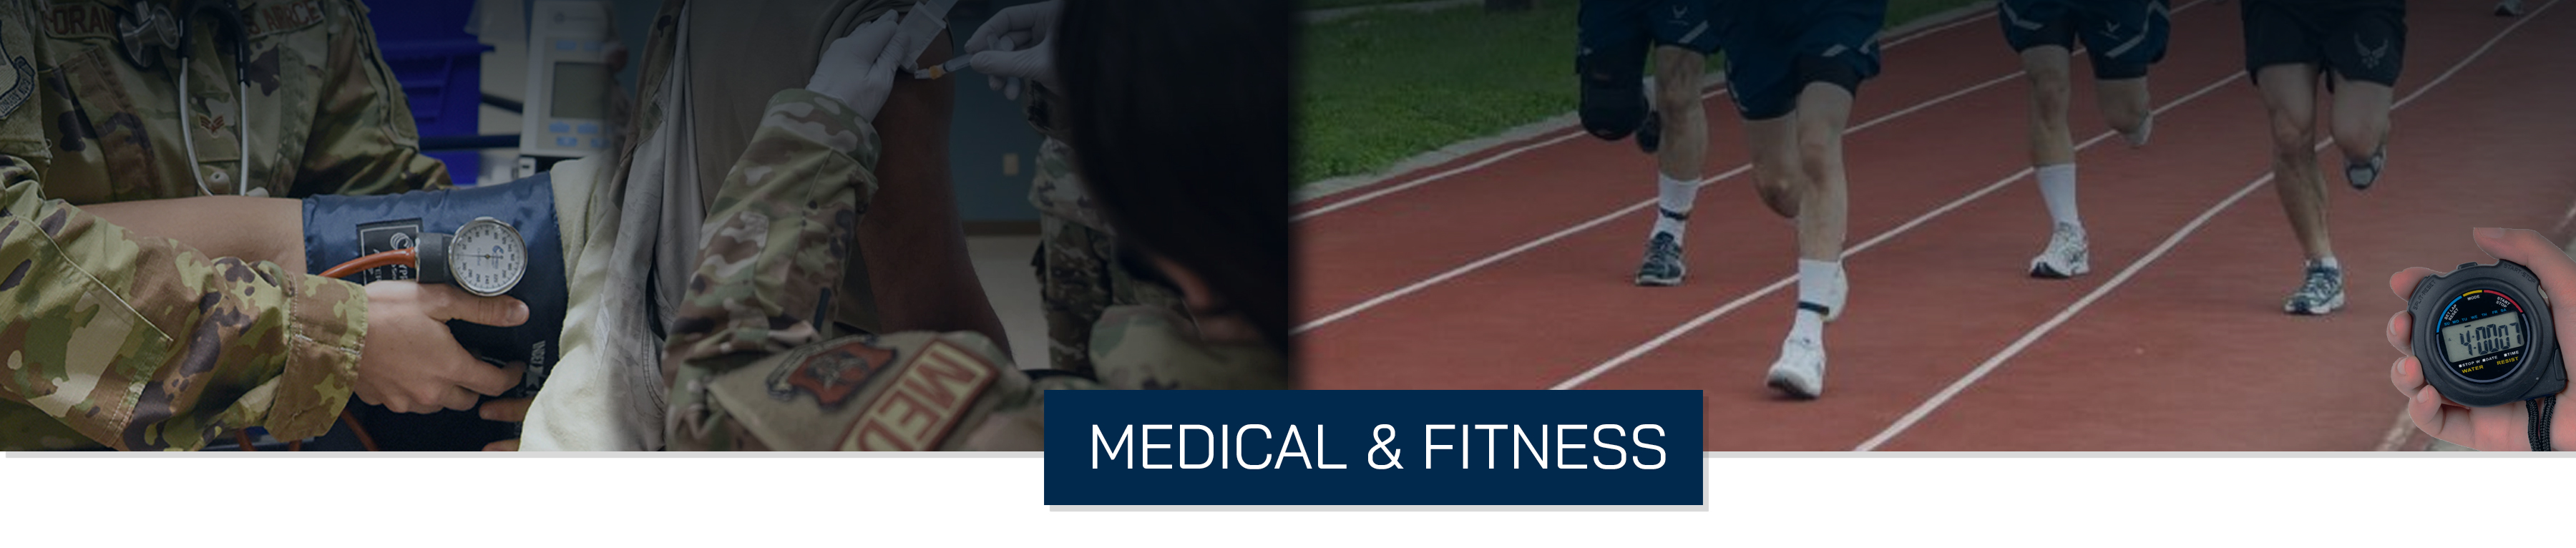 Medical and Fitness Header